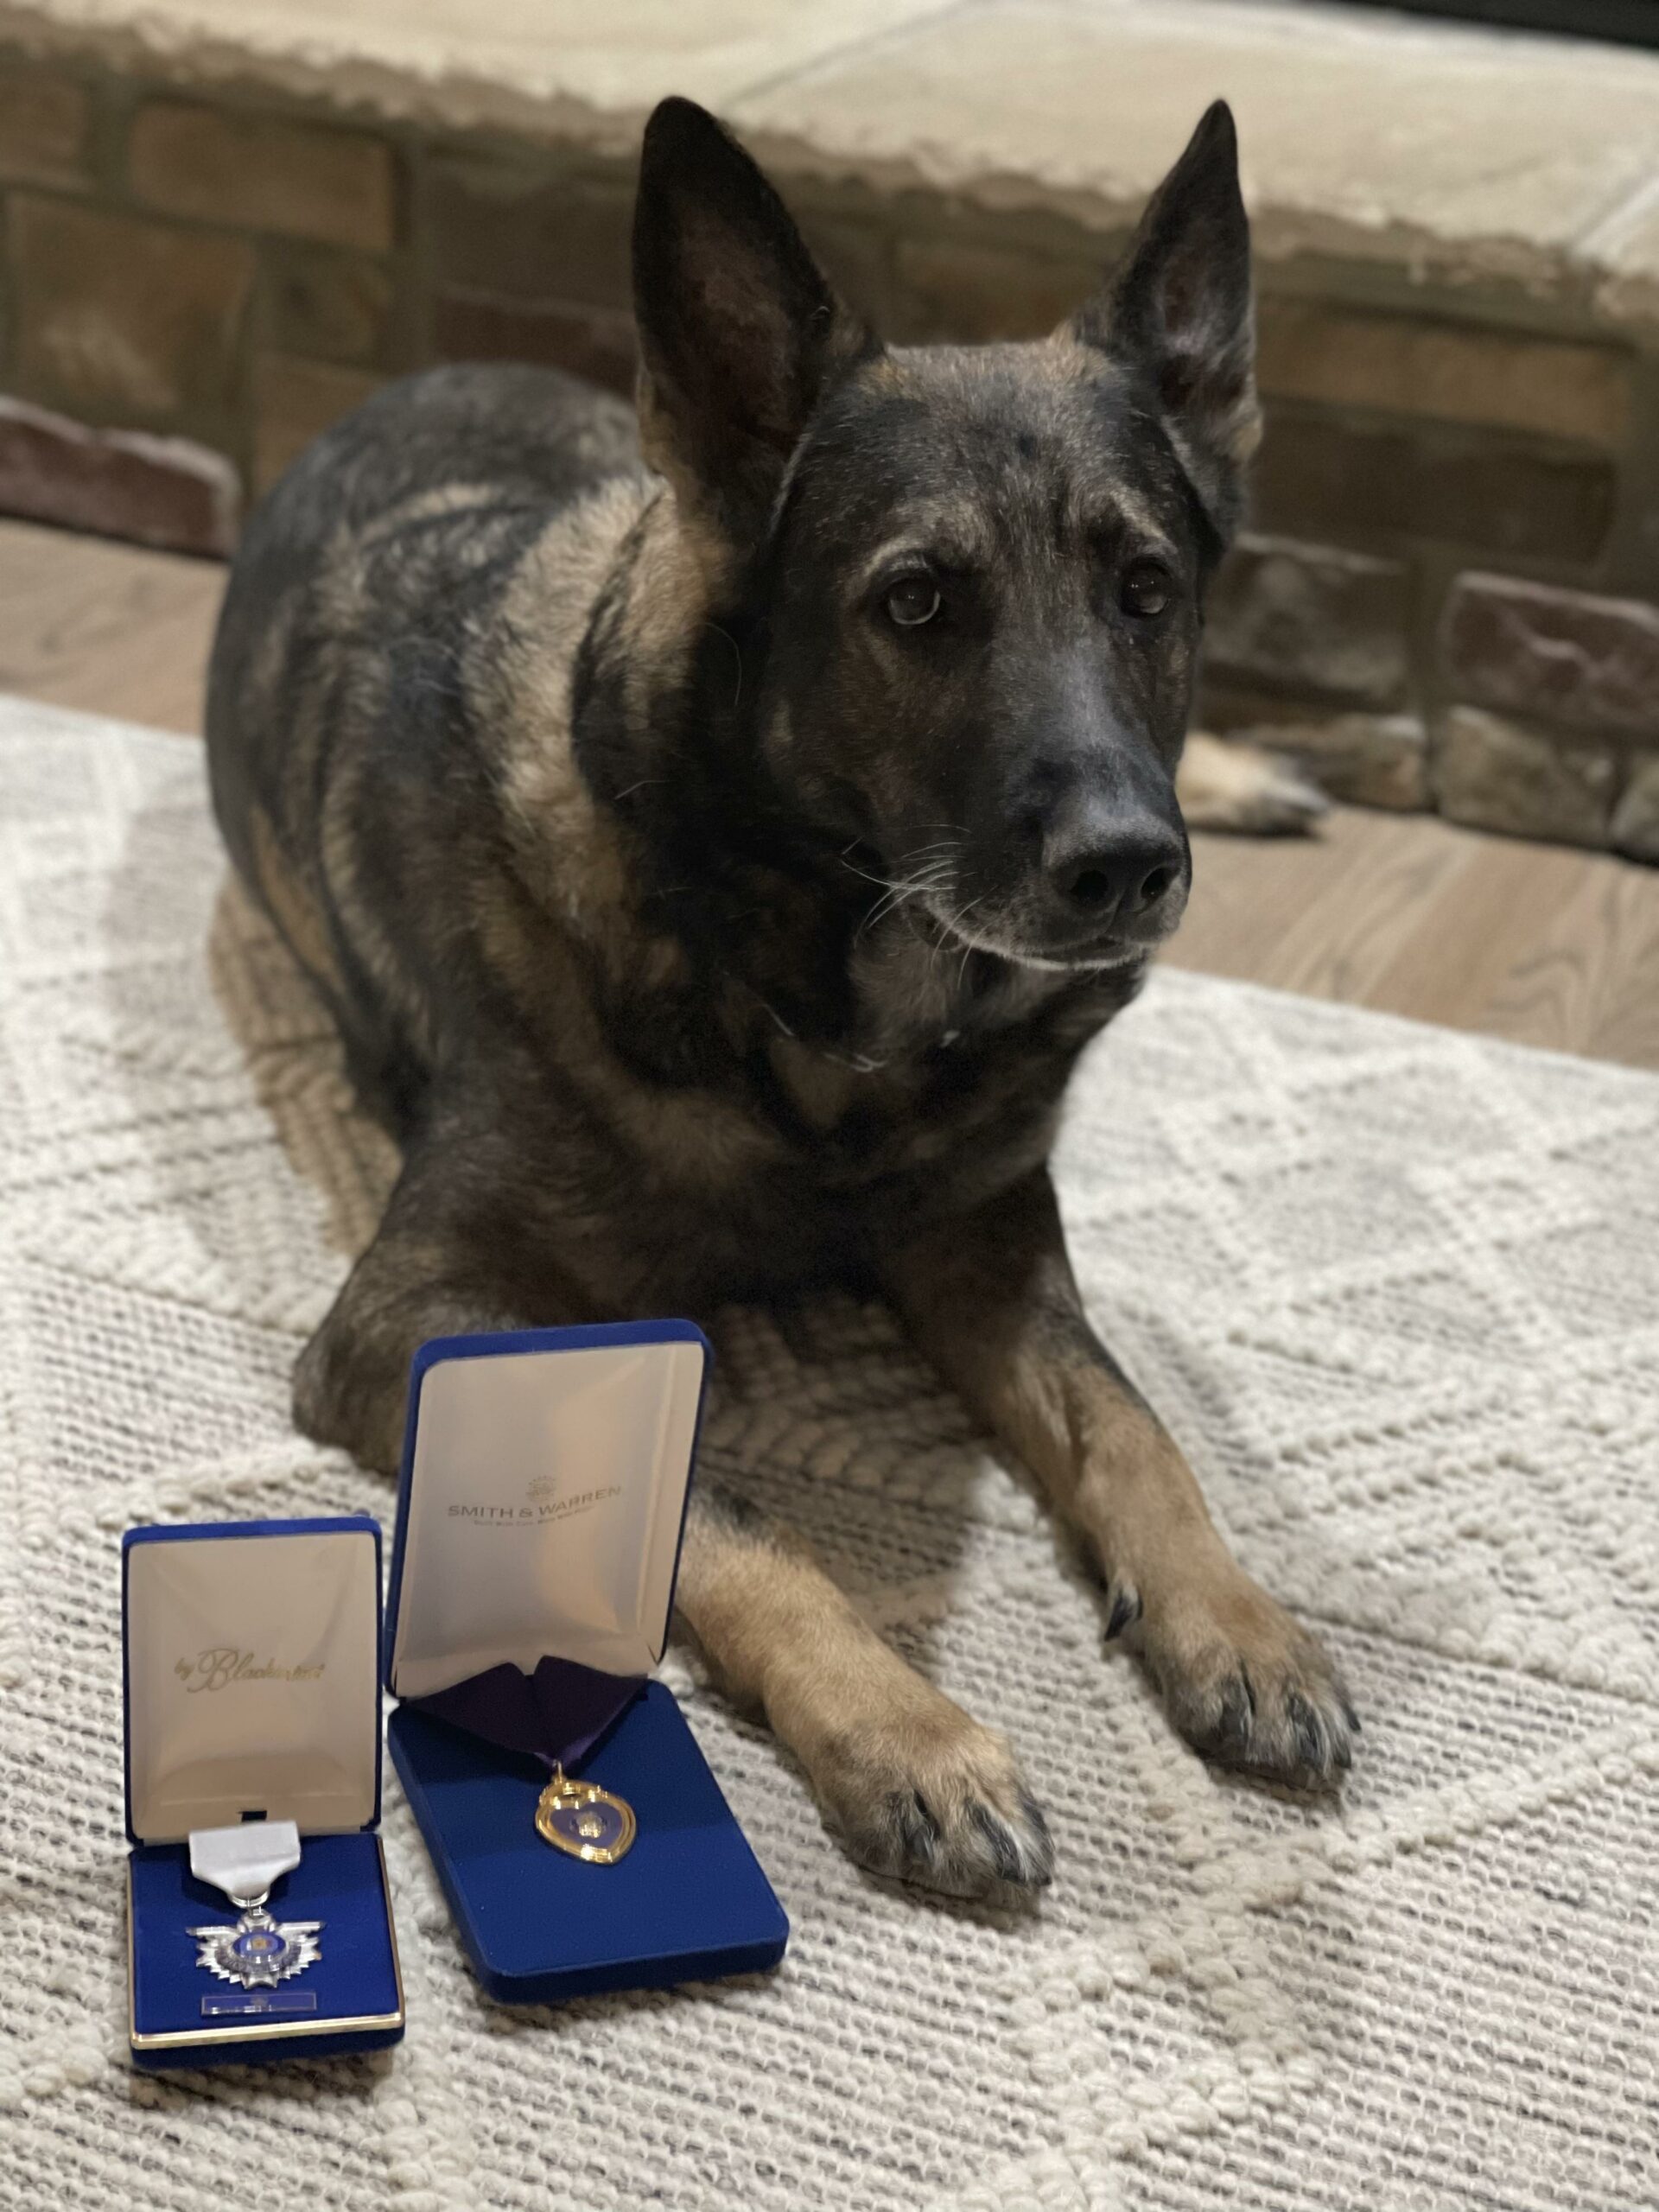 K9 Riggs 1 K9 Riggs, the 2022 Law Enforcement and Detection Hero Dog - American Humane